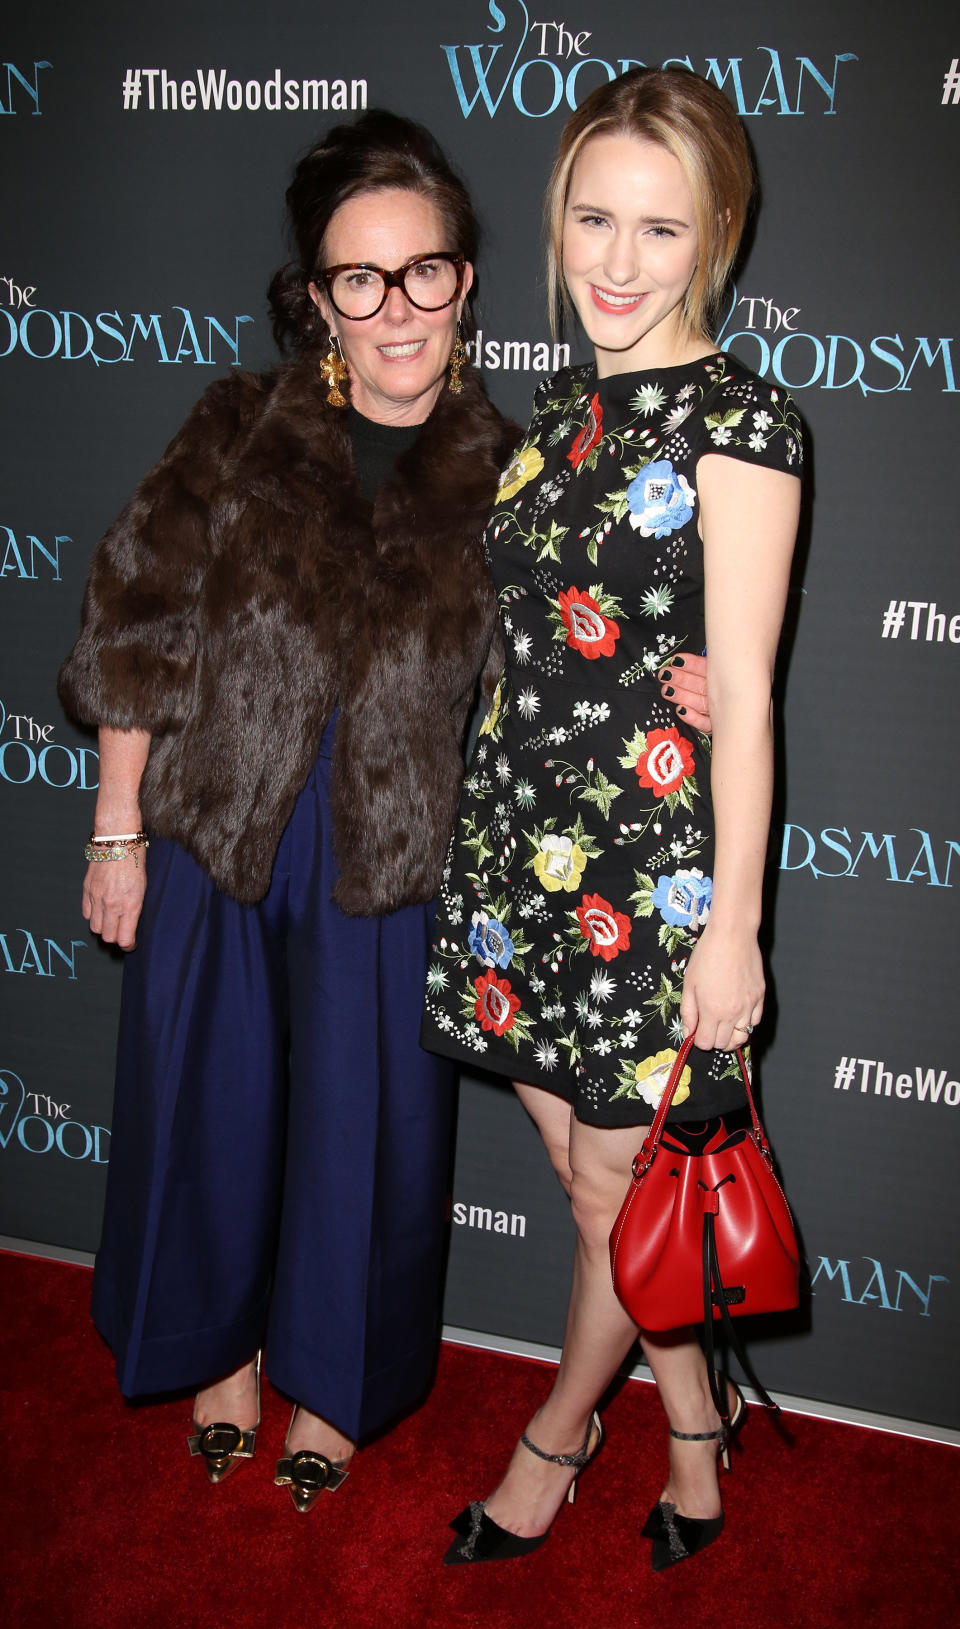 Kate Spade and Rachel Brosnahan pictured together at a movie premiere in 2014.&nbsp; (Photo: Walter McBride via Getty Images)